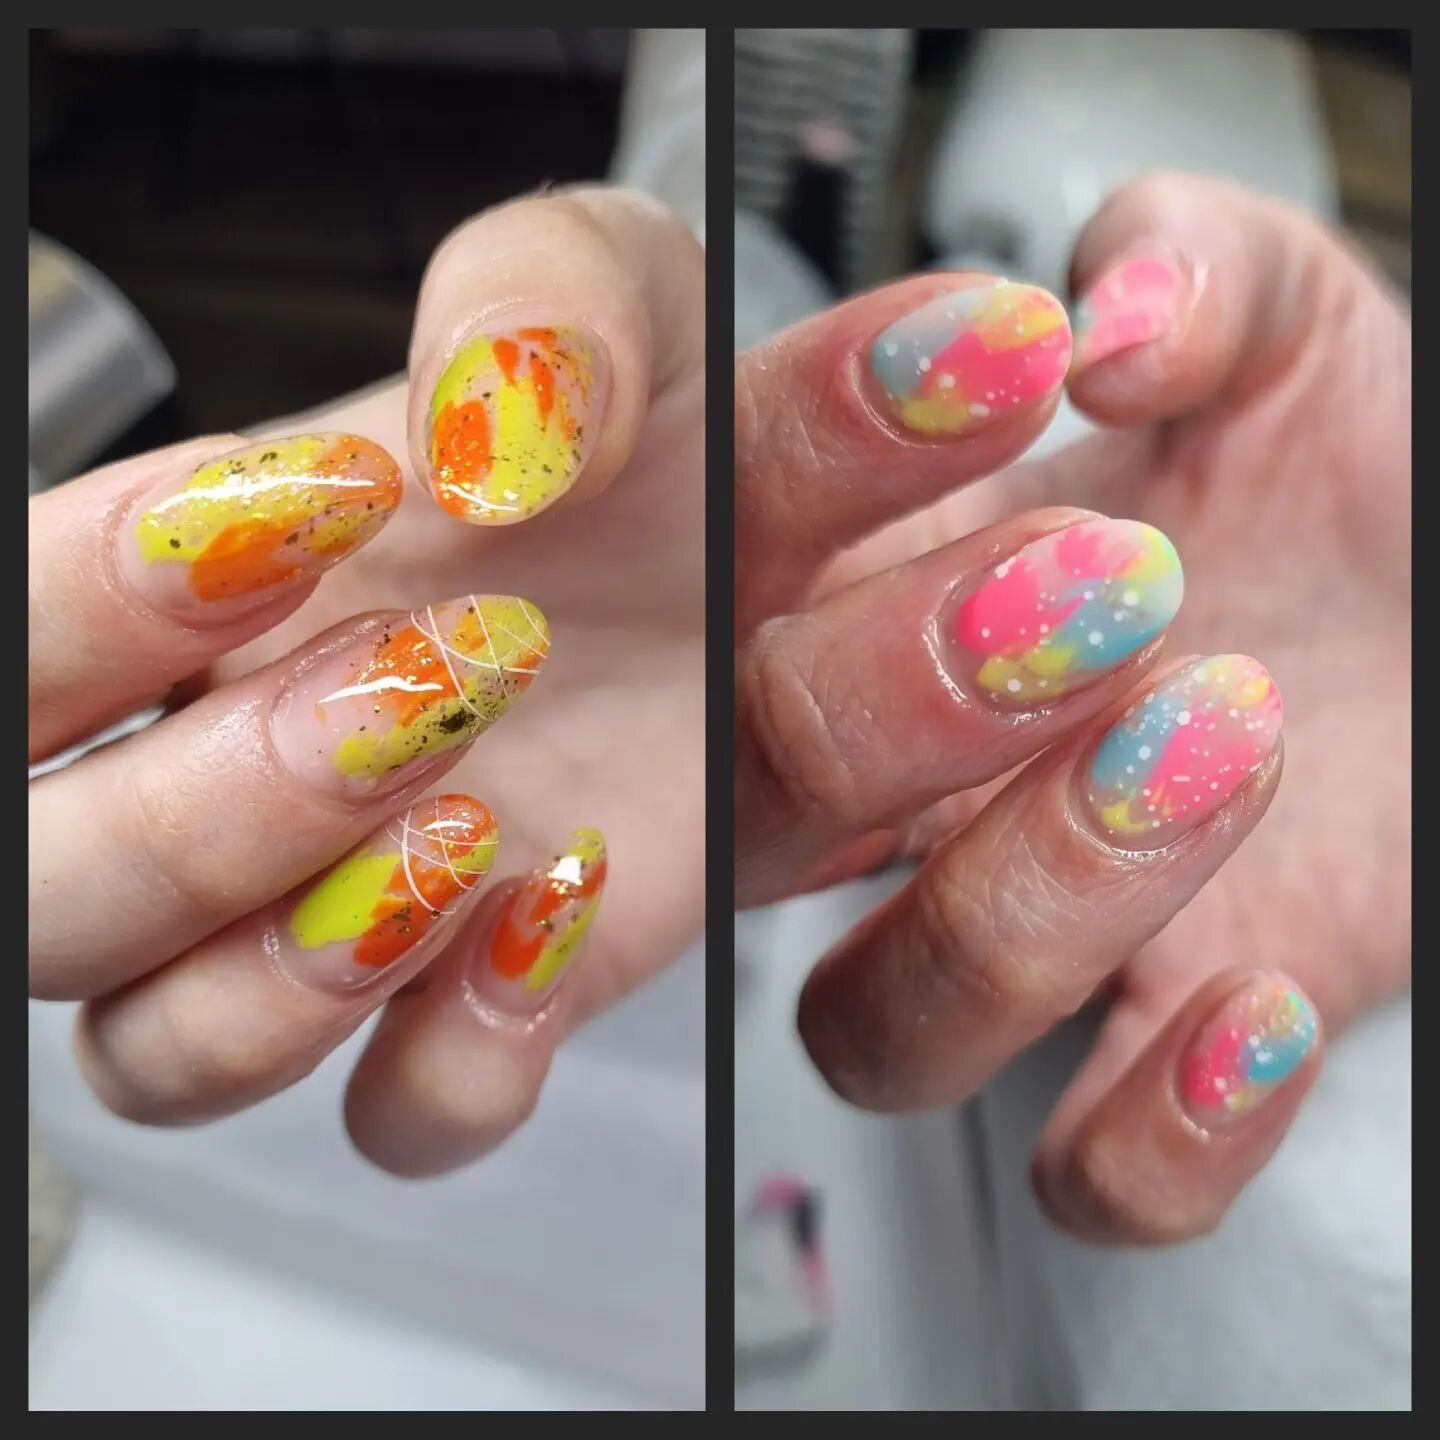 🎨🖌💅Let's start to play with bright colours #nails💅 
#nails #nailsofinstagram #nailstagram  #nailsart #nailsdesign #nailstyle #nailsnailsnails #nailslondon #nailslondon💅 #nailsfinsburypark #londonnails #colourfullnails #nailsidea #neonnails